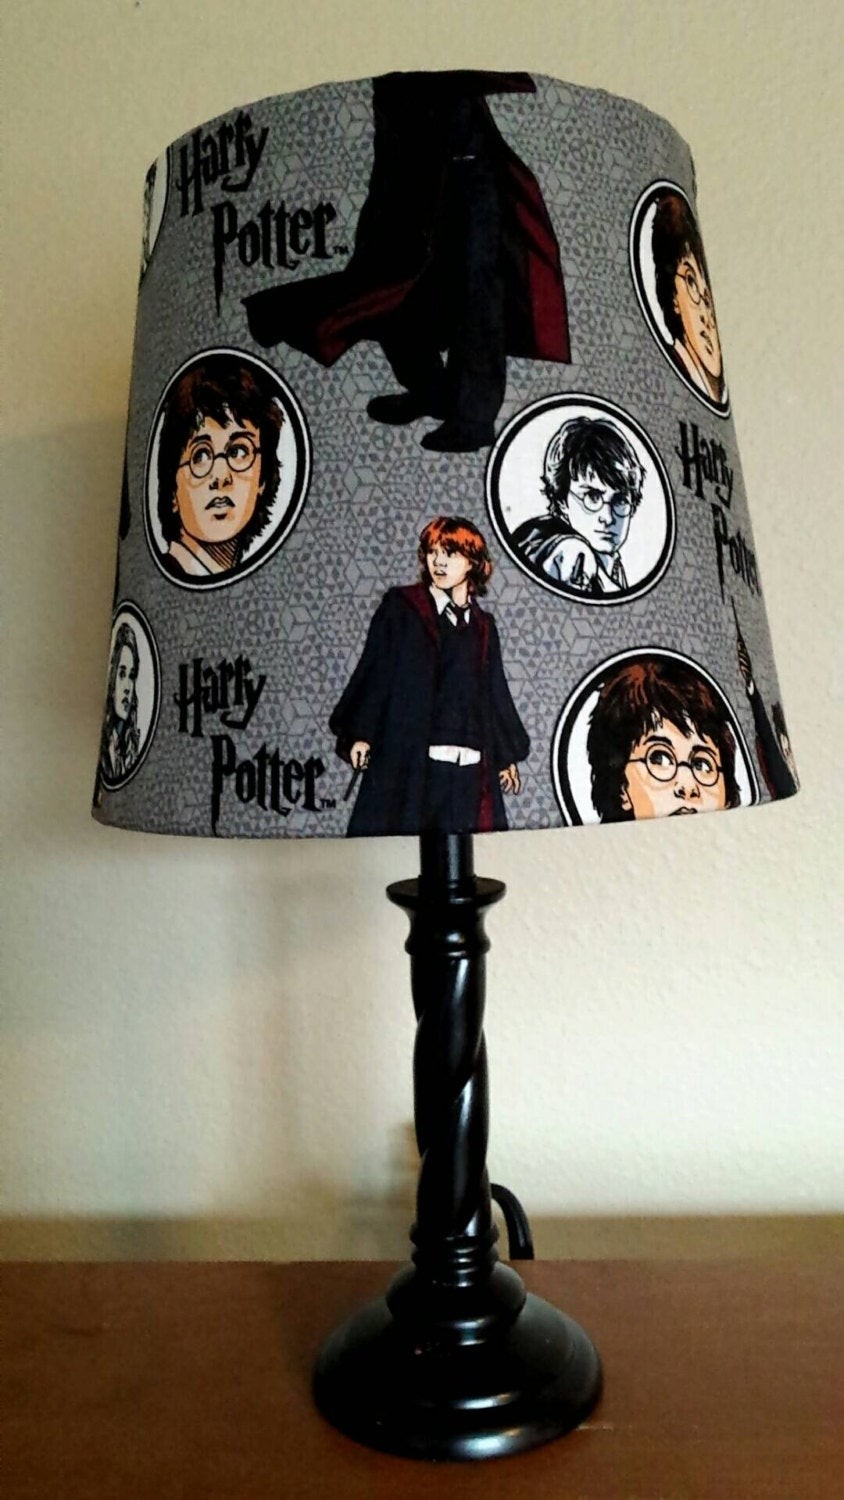 Harry potter lamp shade by theoutgeek on etsy